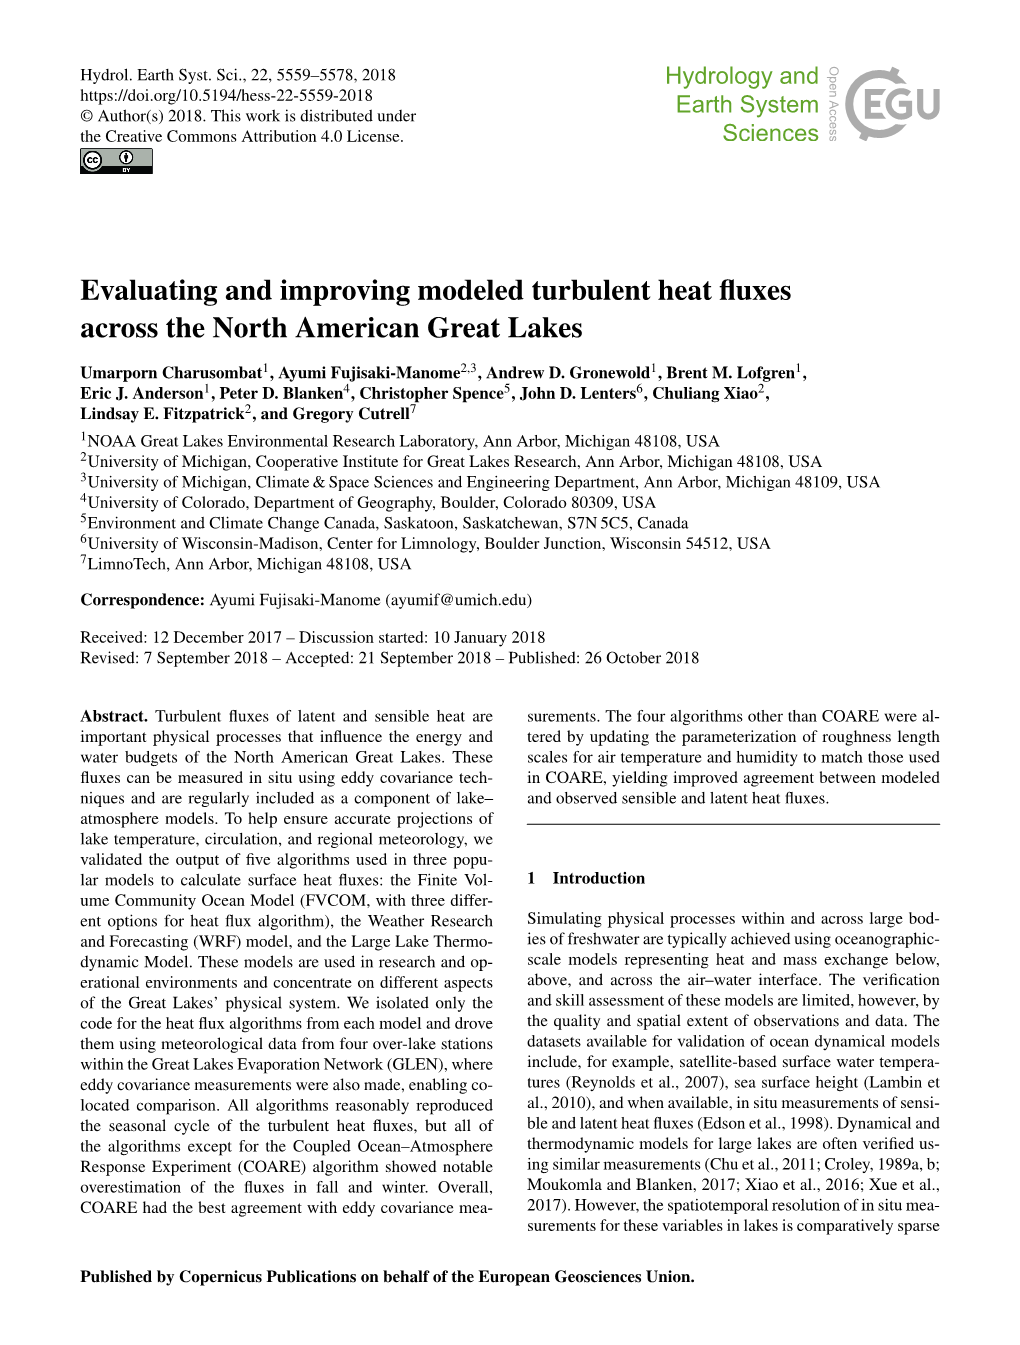 Evaluating and Improving Modeled Turbulent Heat Fluxes Across the North American Great Lakes